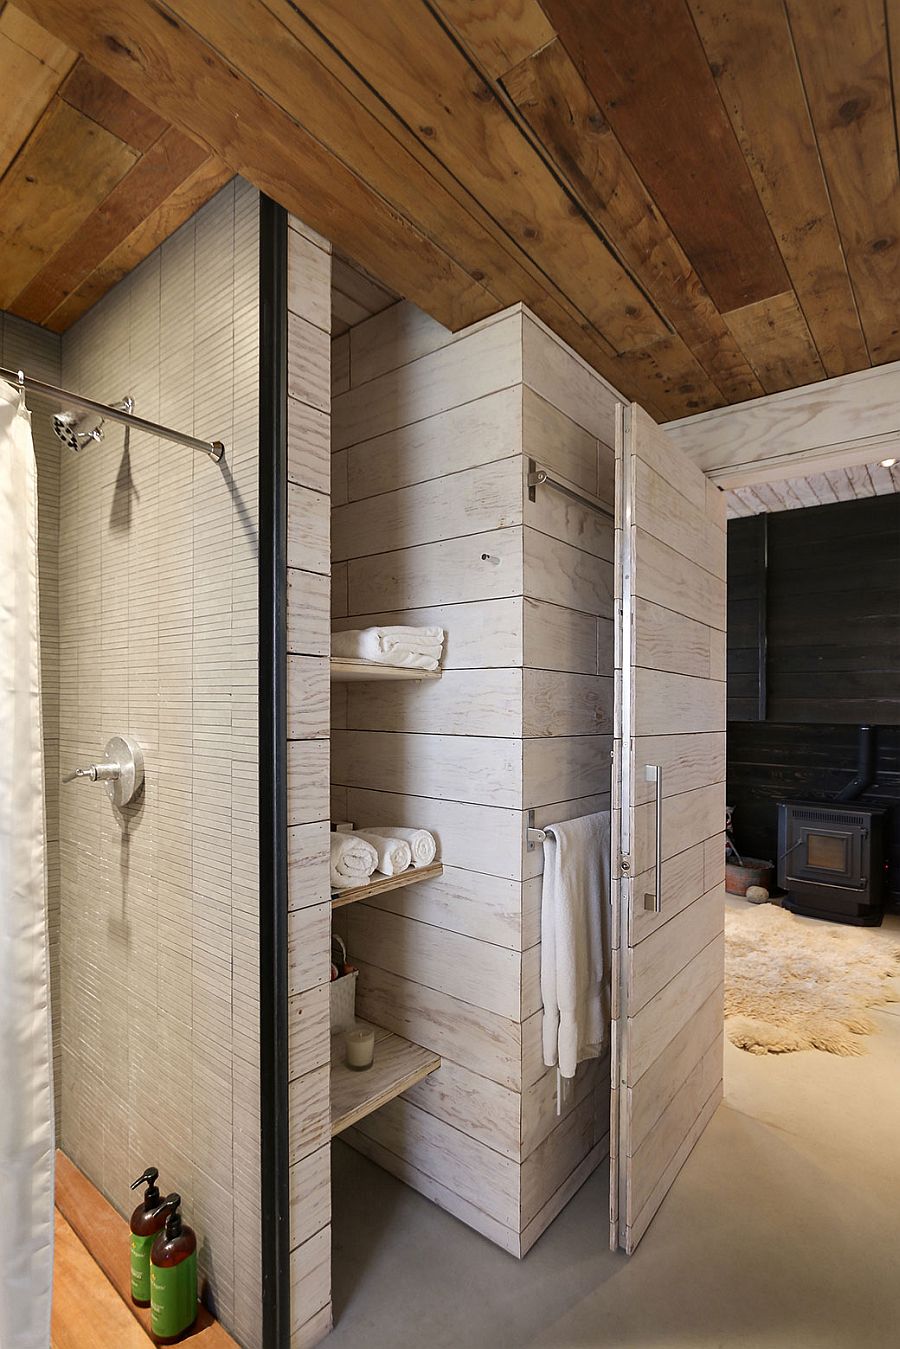 Towel storage and display idea for the rustic modern bathroom